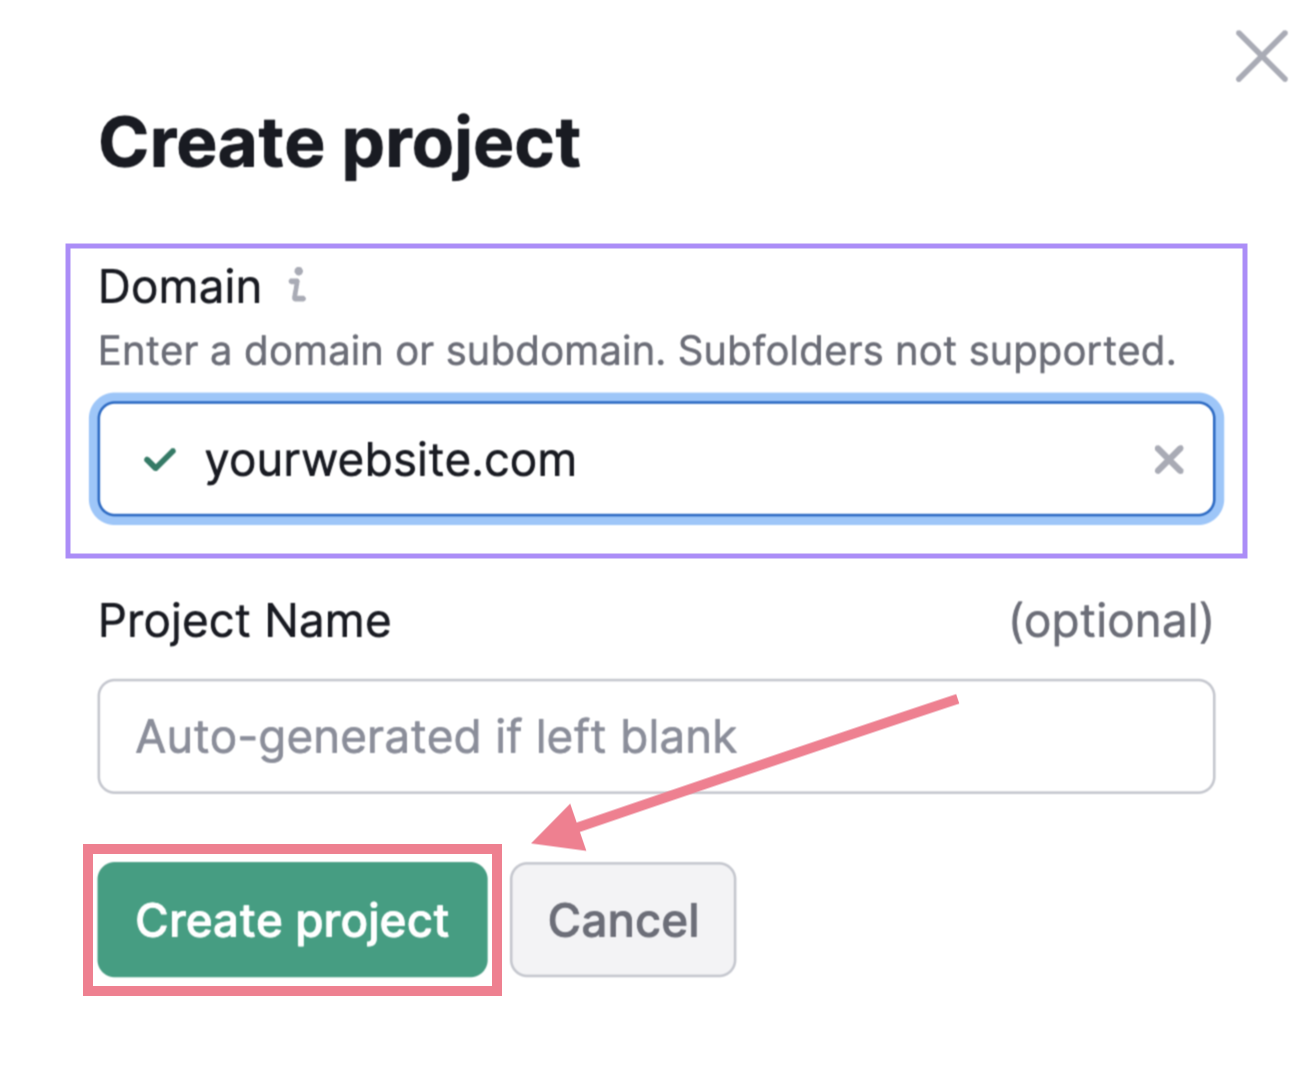 "yourwebsite.com" entered as an example domain in the "Create project" window in Site Audit